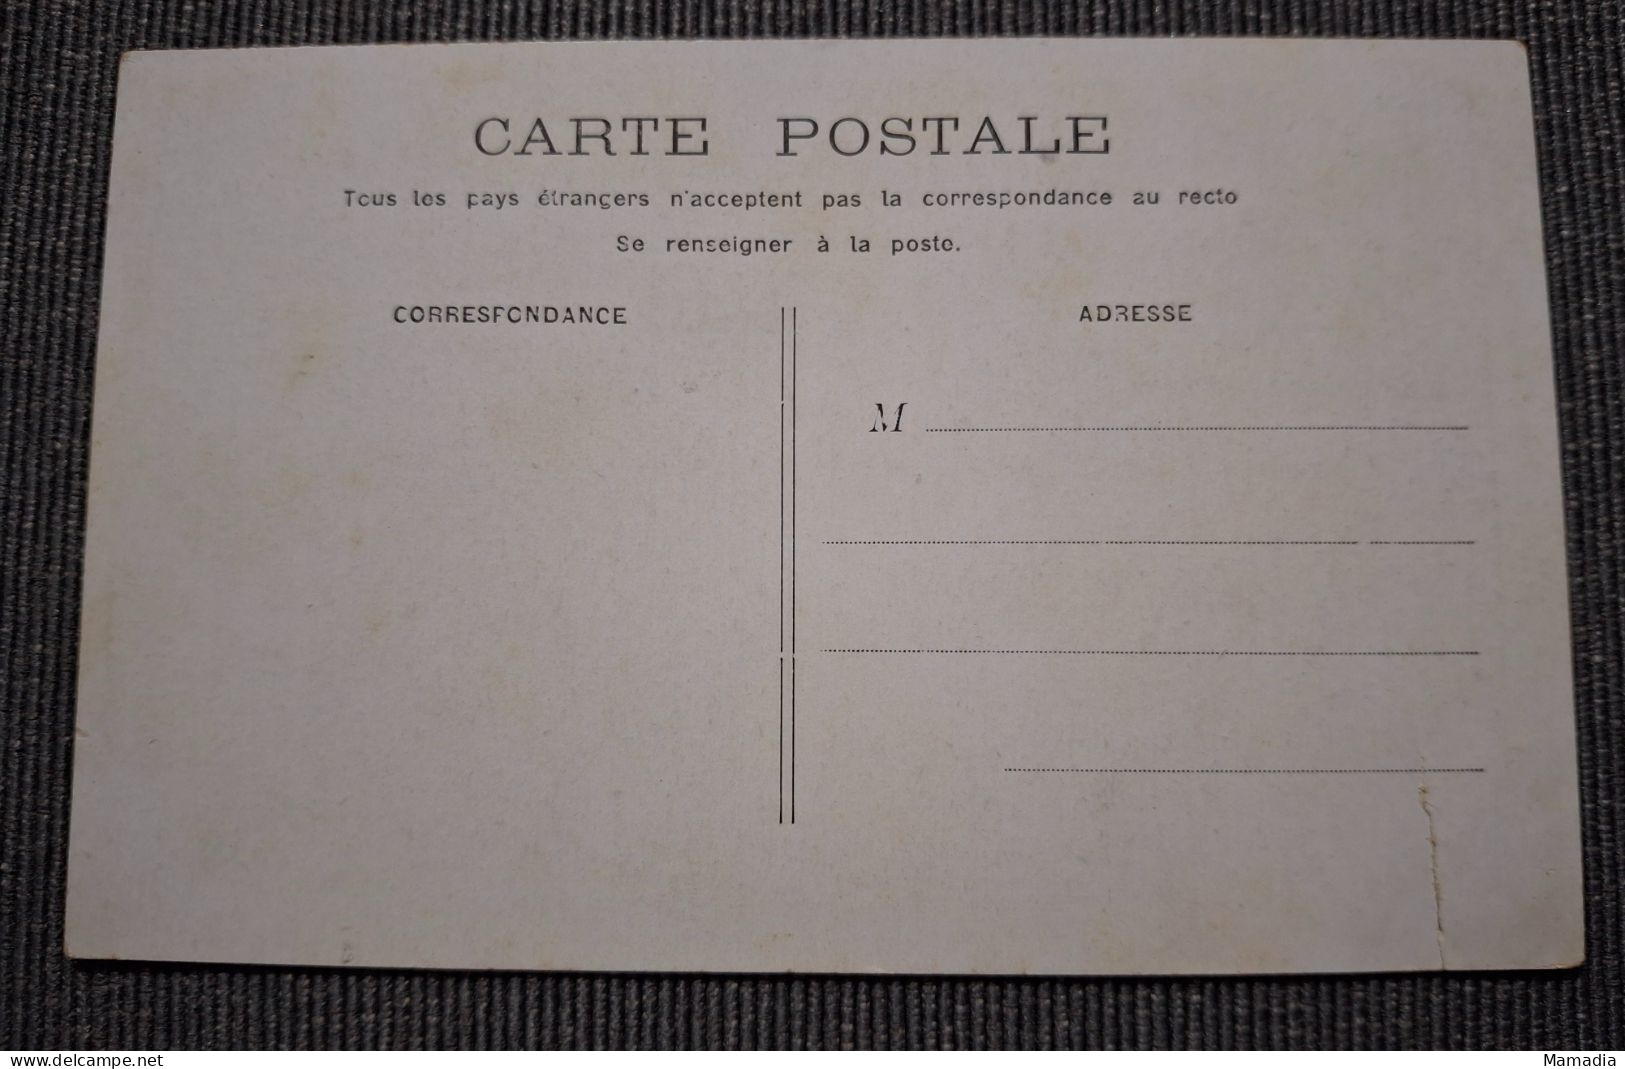 CARTE POSTALE ANCIENNE CYCLE VELO SERIE "MADEMOISELLE ECOUTEZ-MOI DONC" N°1 / 6 - Couples